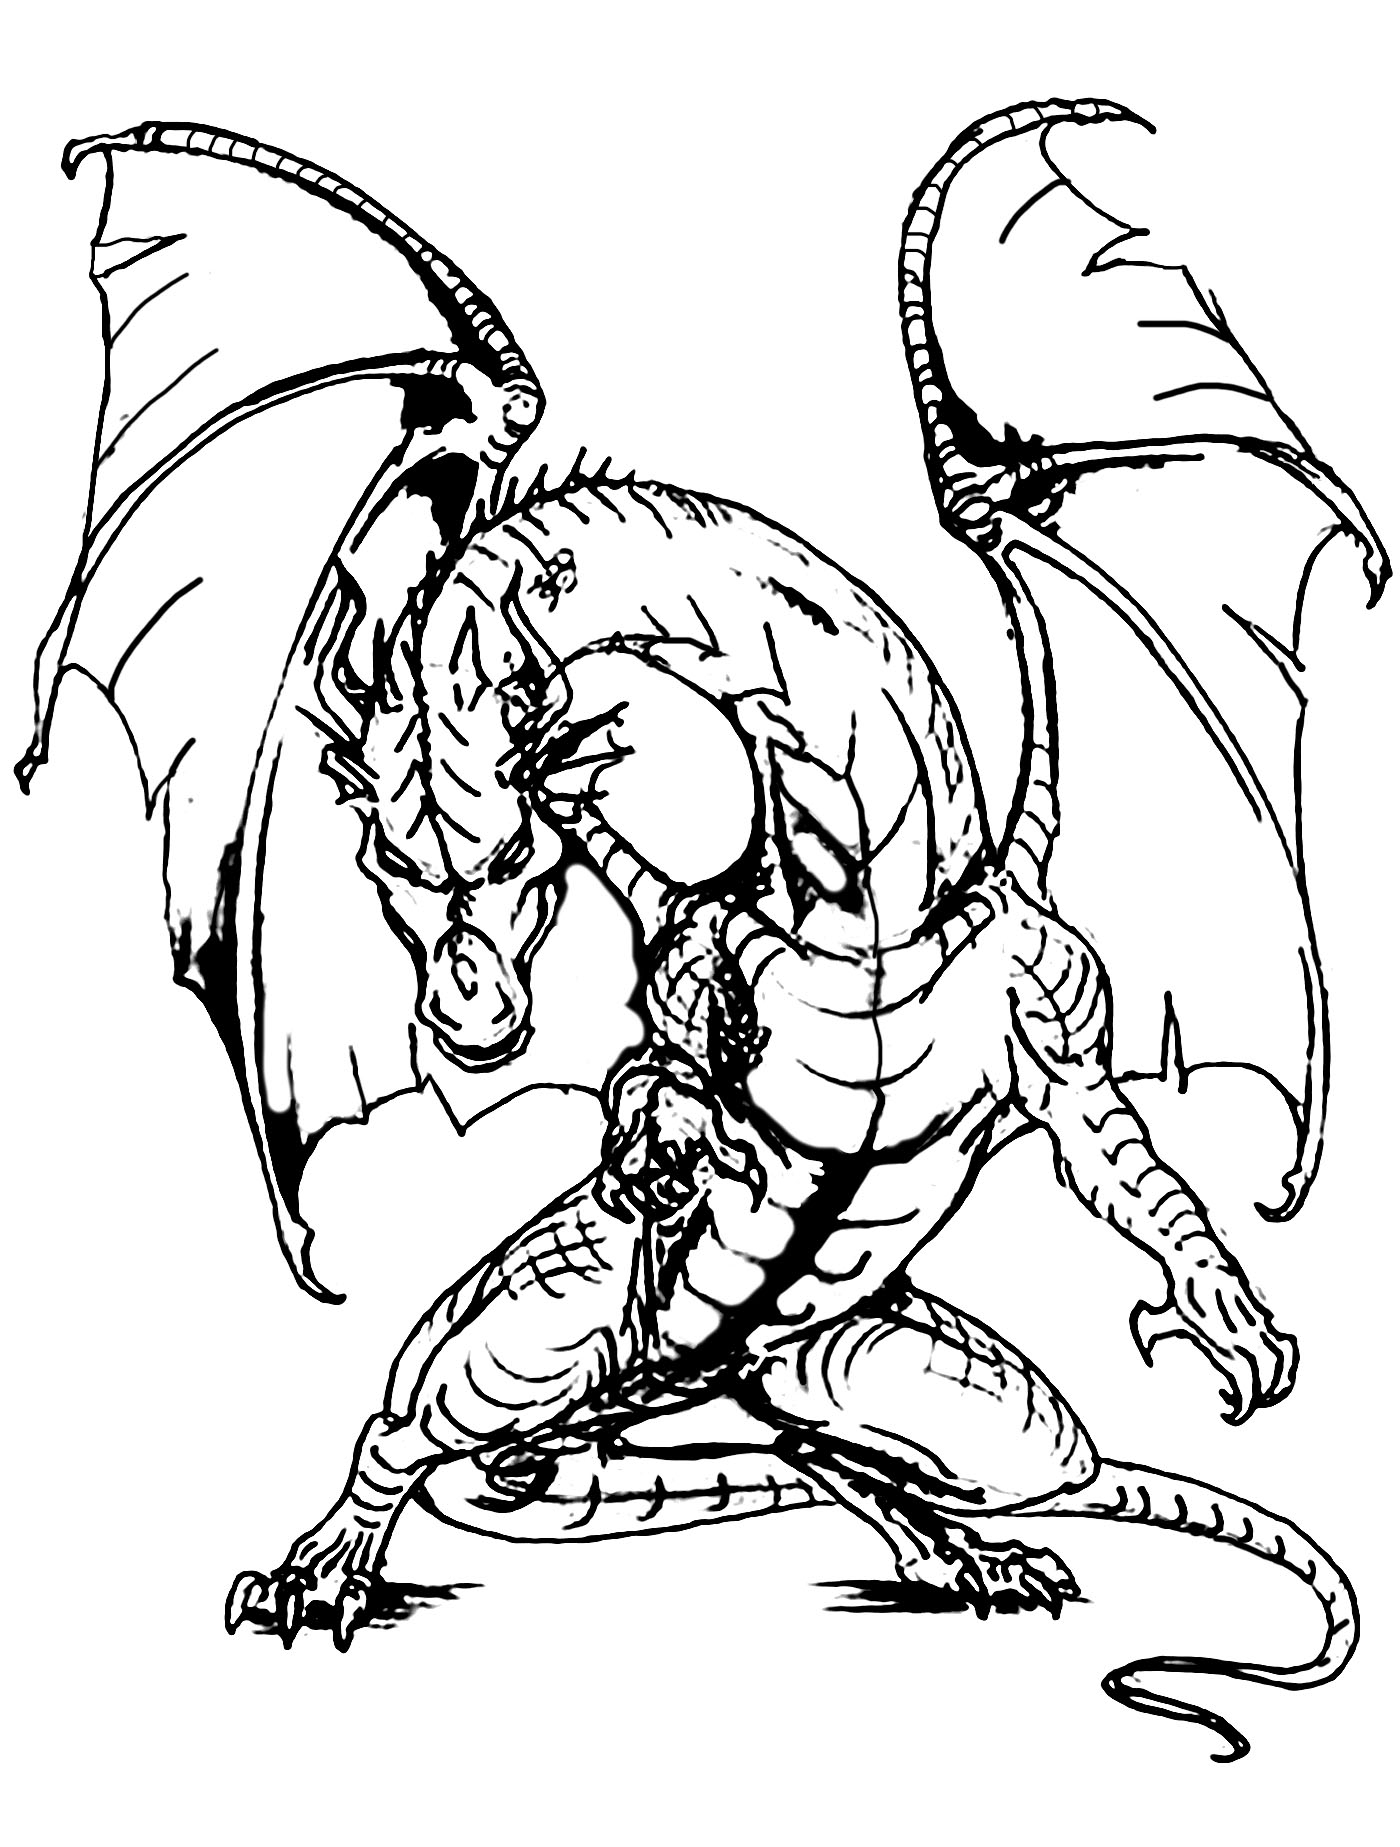 Knights Coloring Pages Knights And Dragons For Children Knights And Dragons Kids Coloring